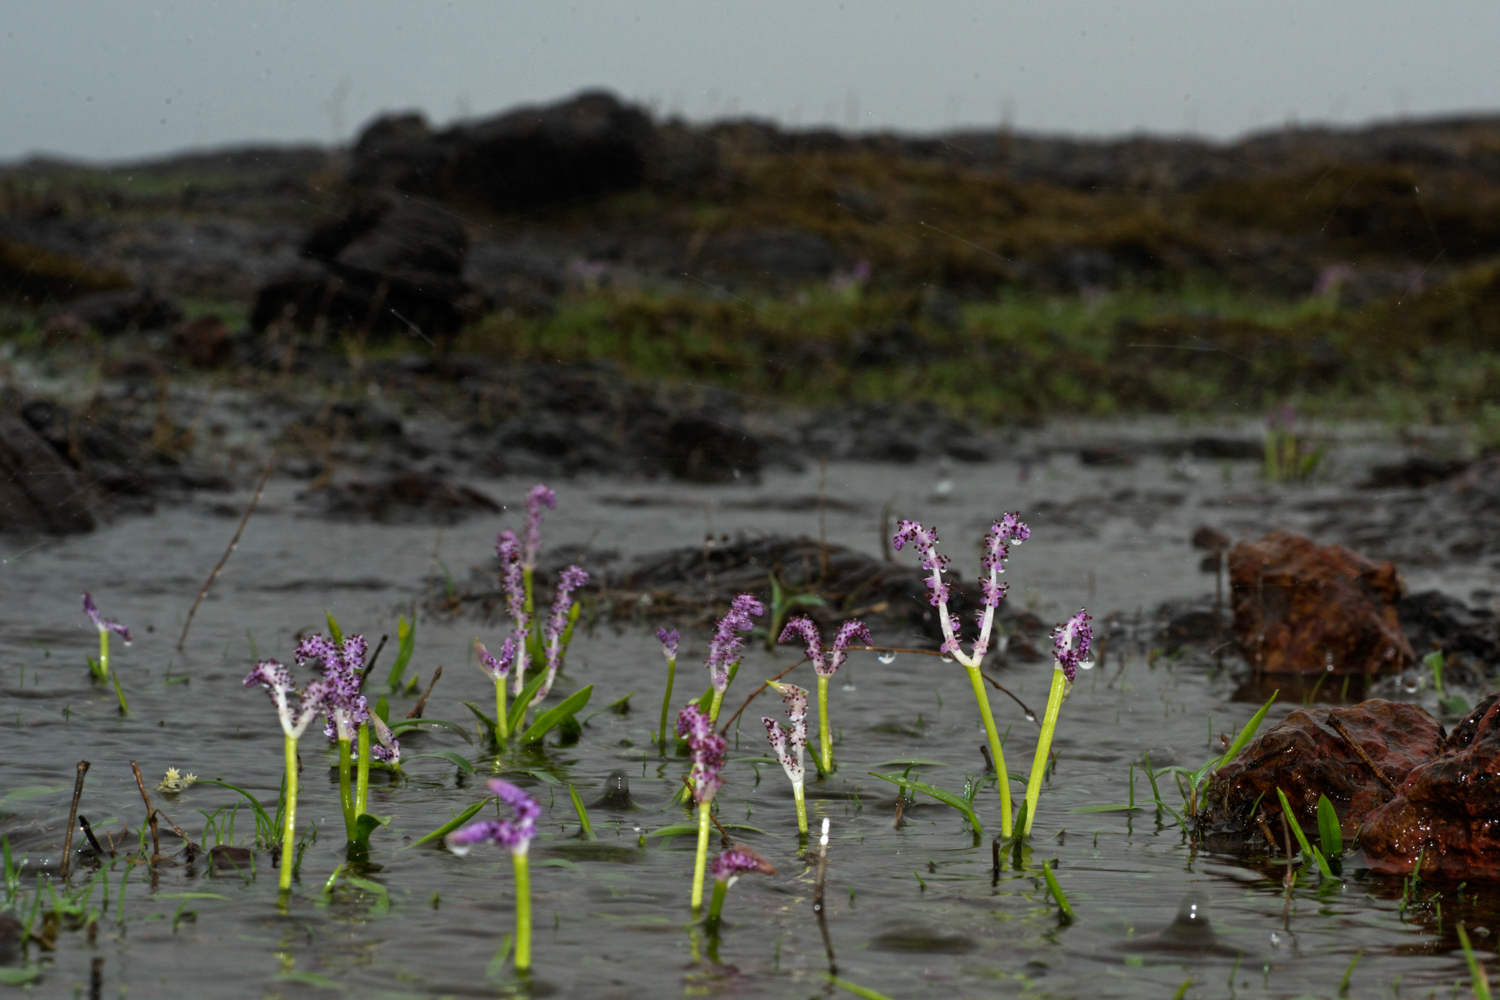   Aponogeton satarensis  is an endemic aquatic plant known only from five temporary pools around the Kaas area. 